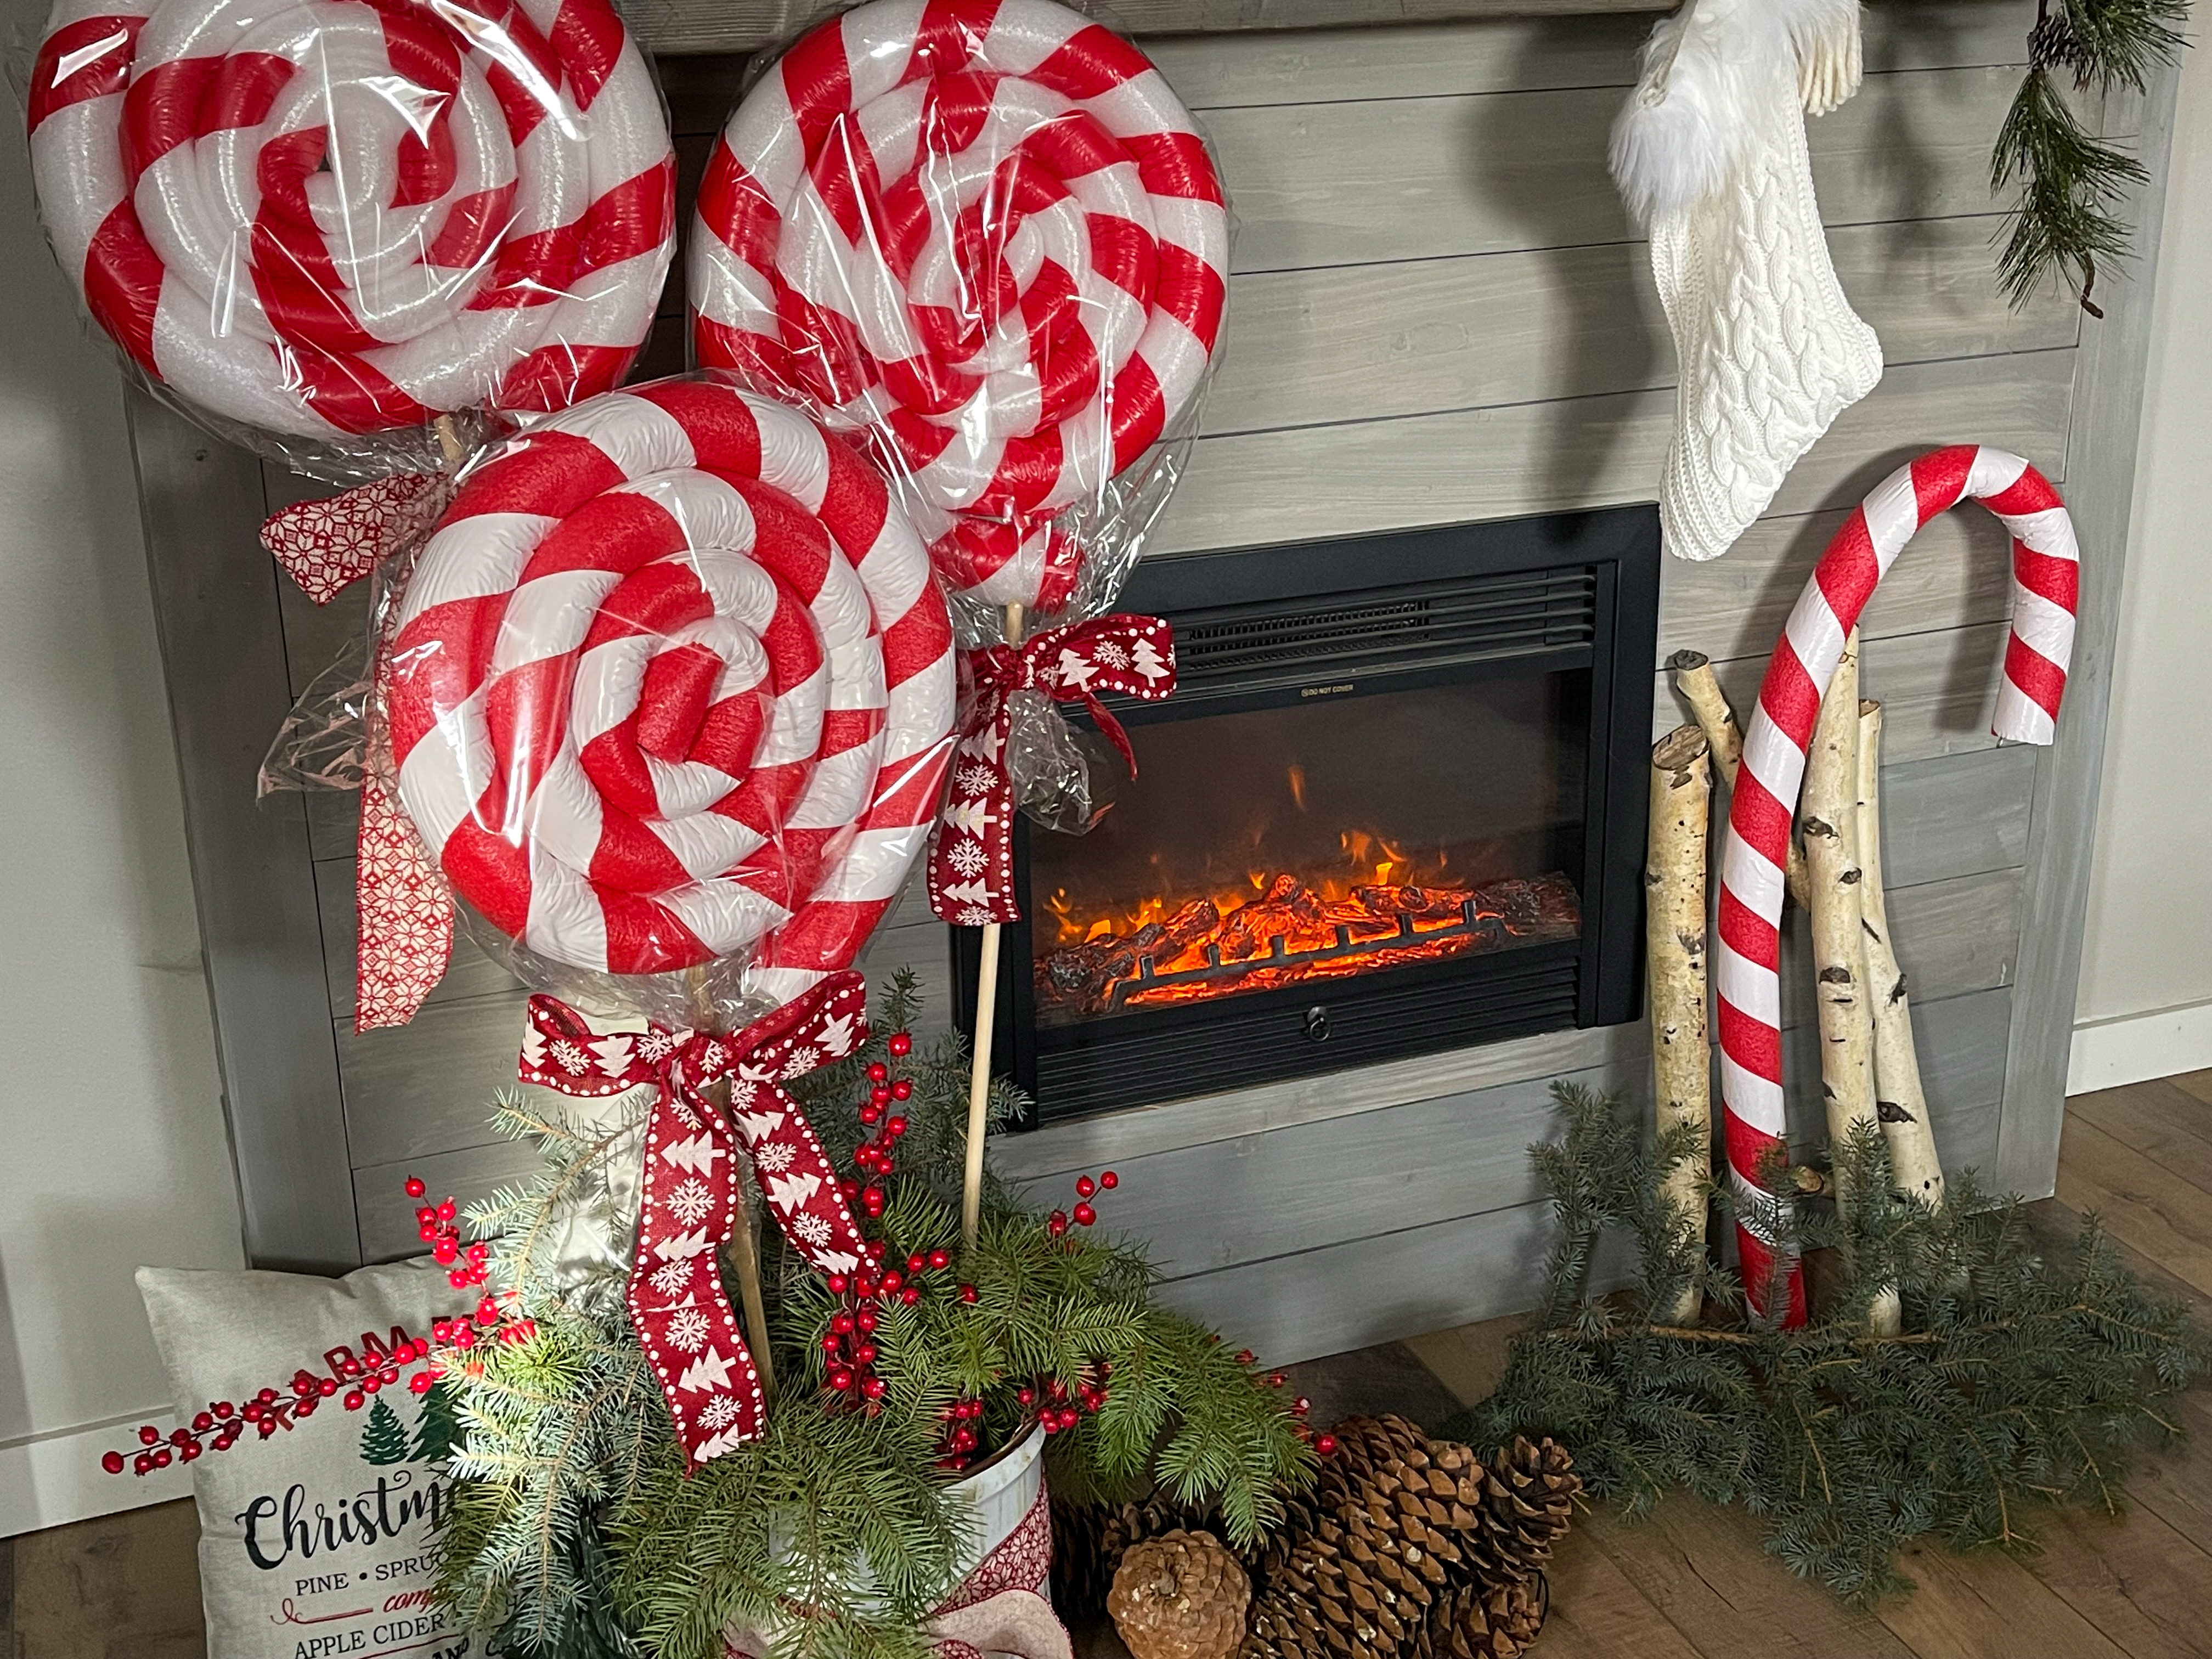 centerpieces with candy cane theme